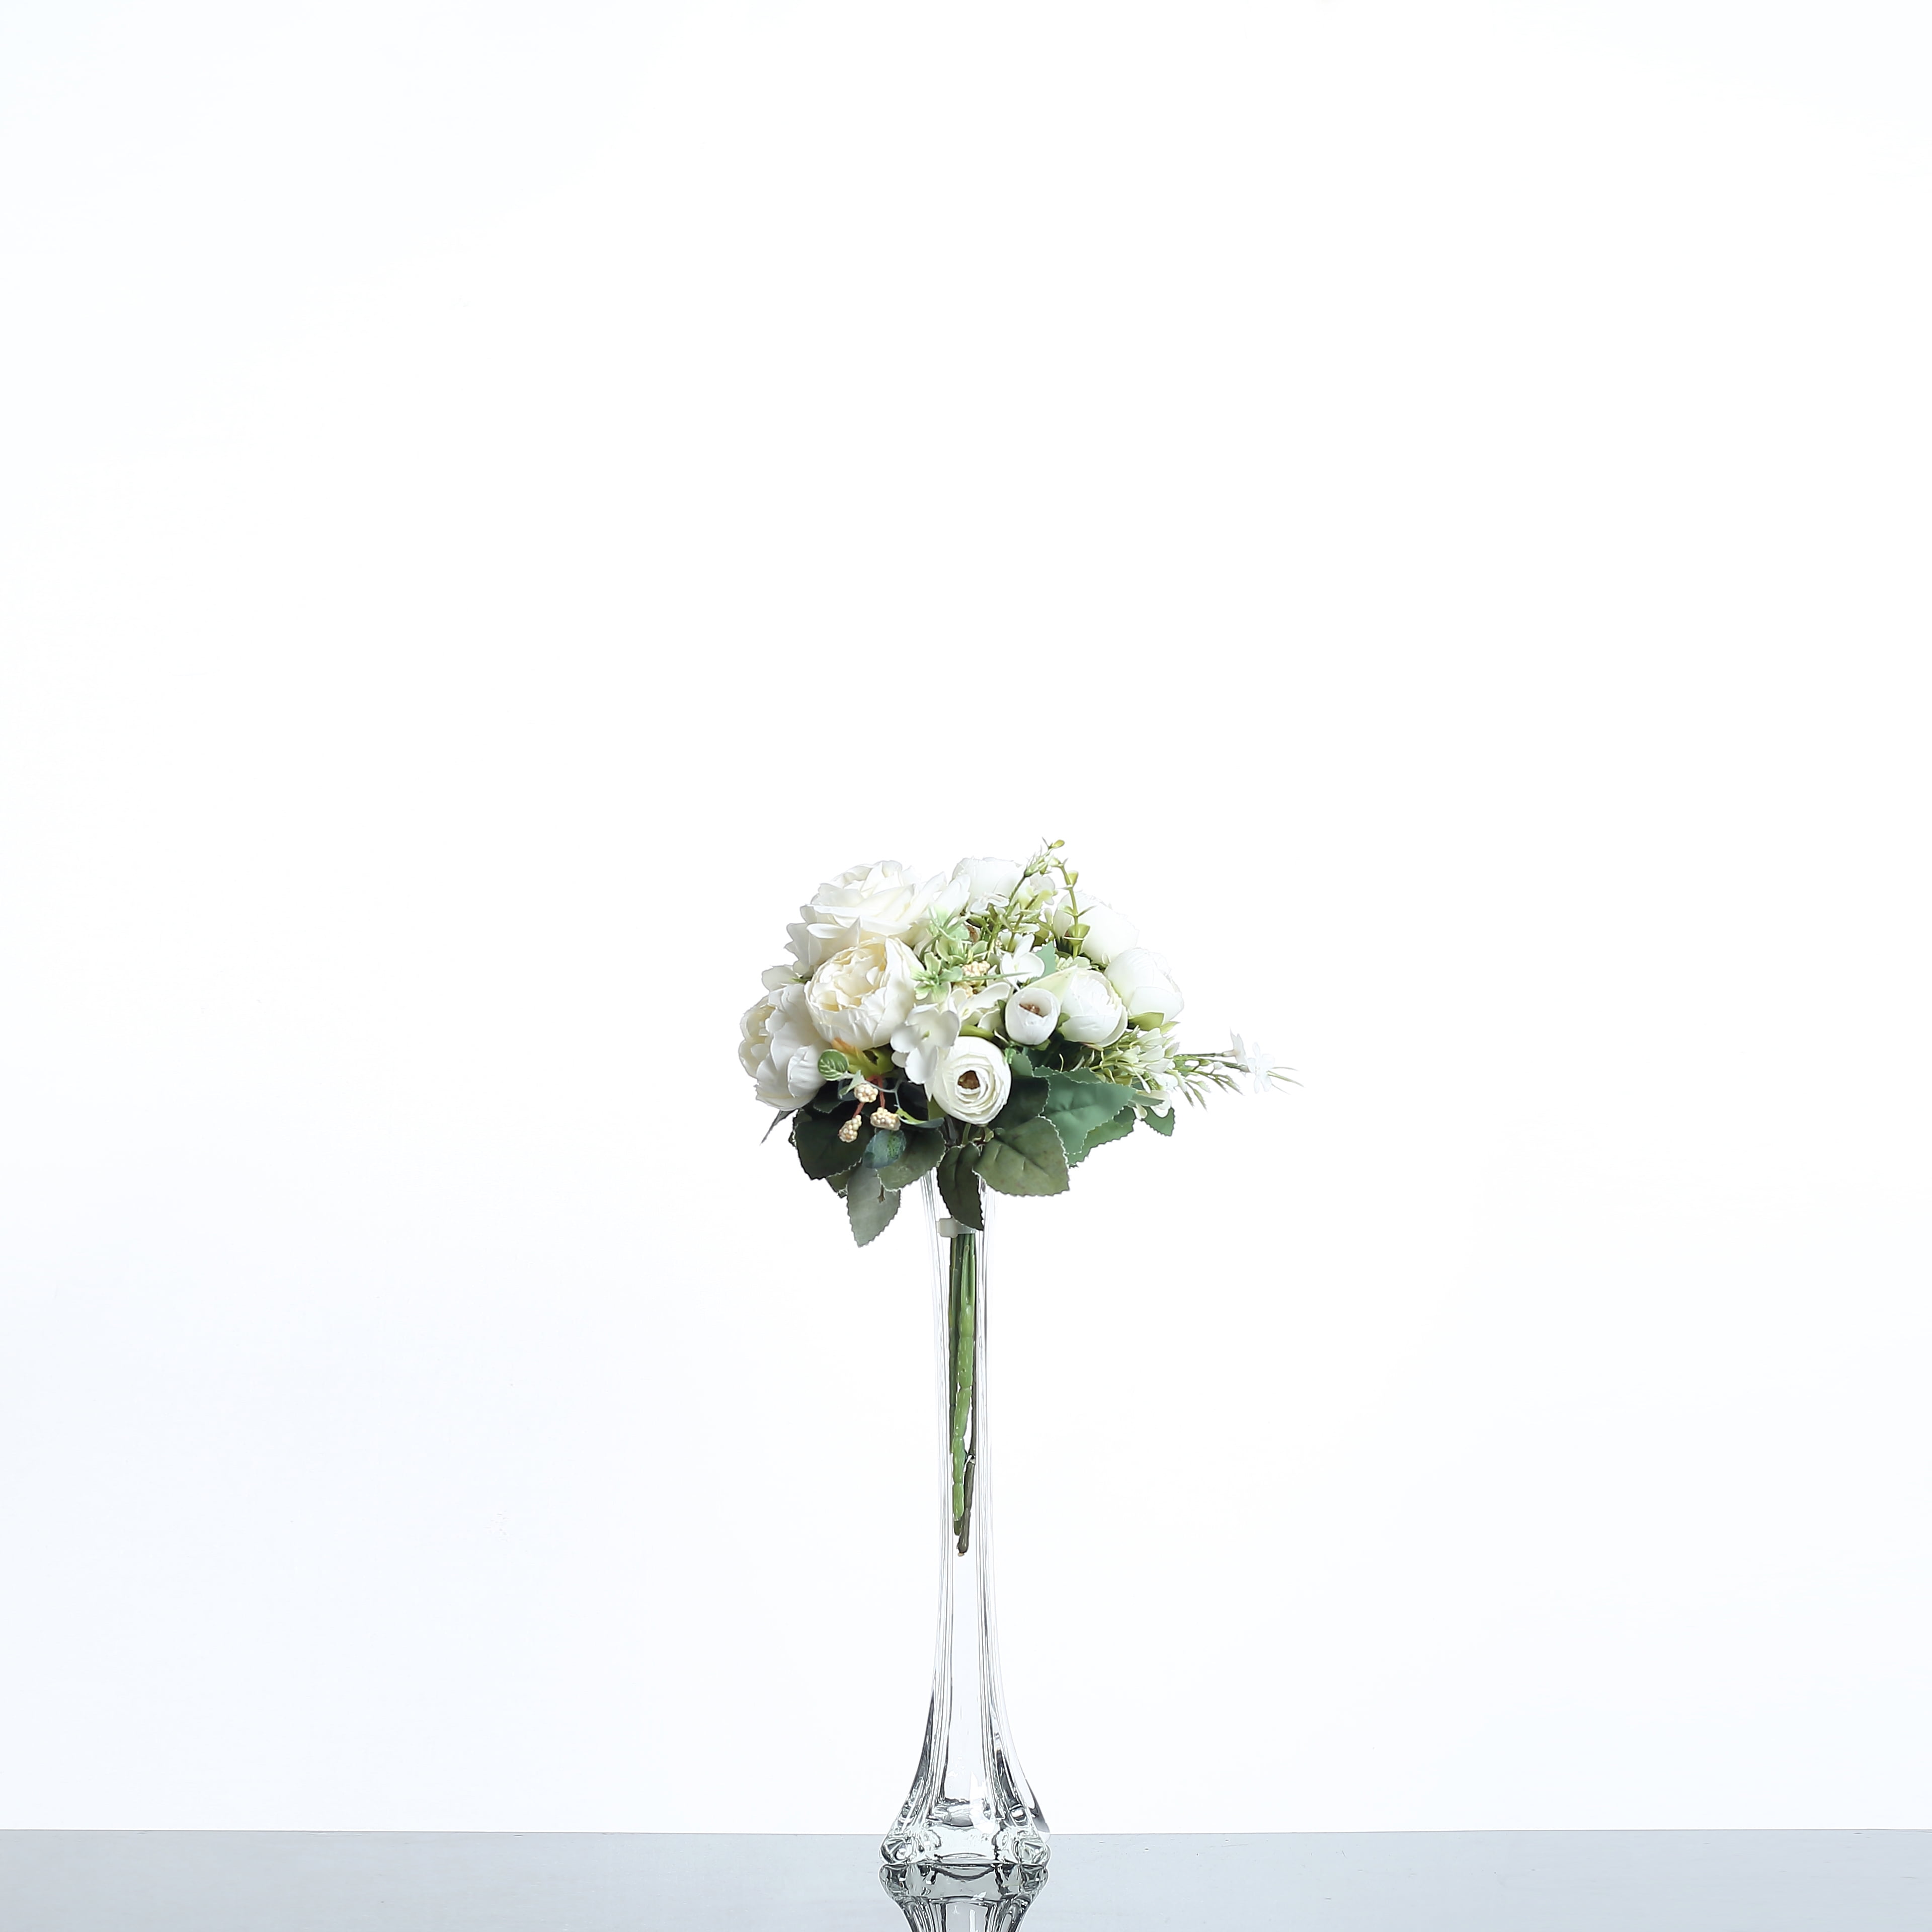 How to Create Floral Arrangements With Eiffel Tower Vases